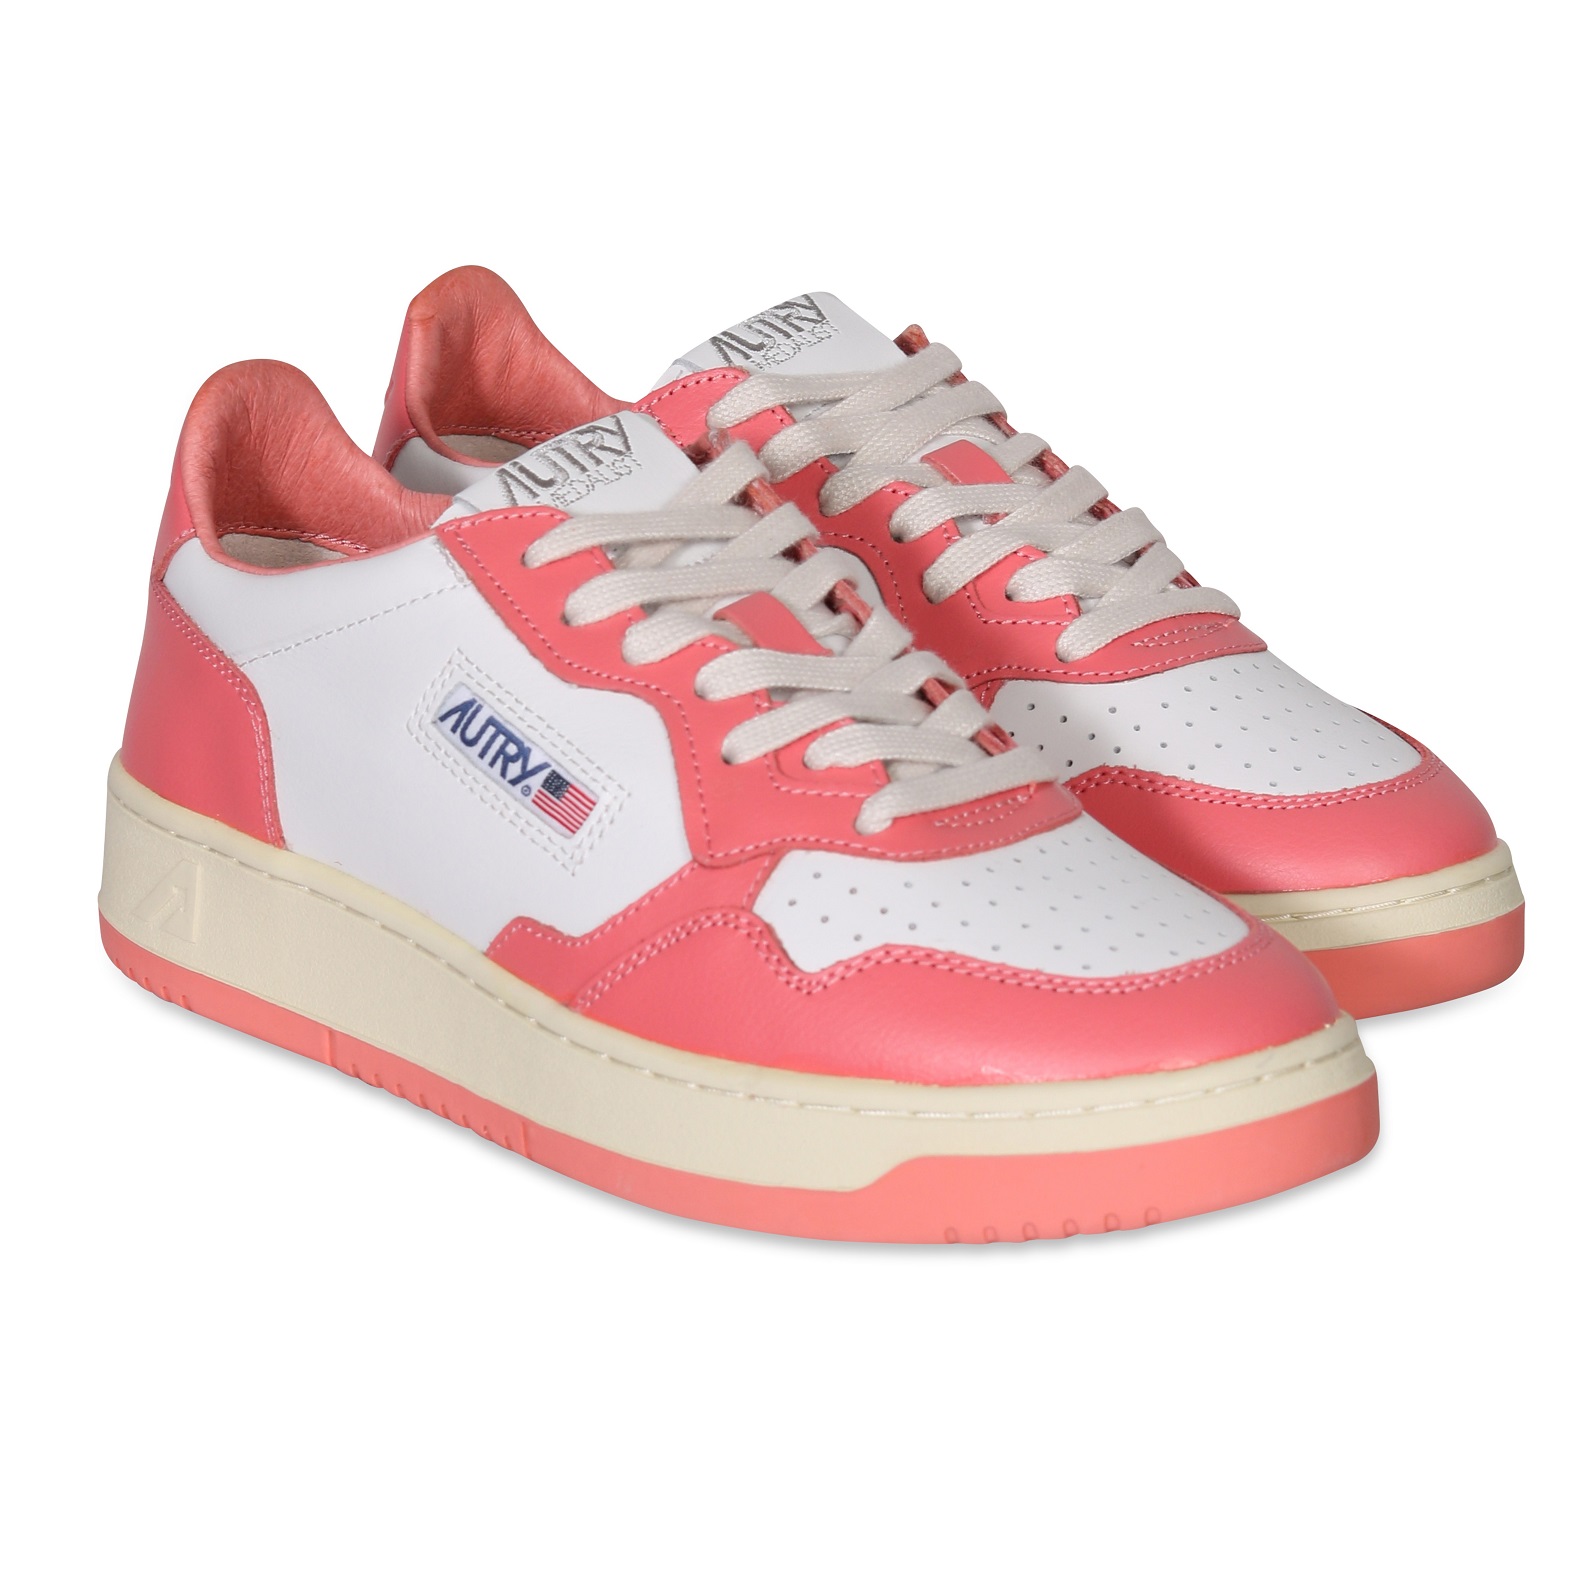 AUTRY ACTION SHOES Low Sneaker White/Lobster 35